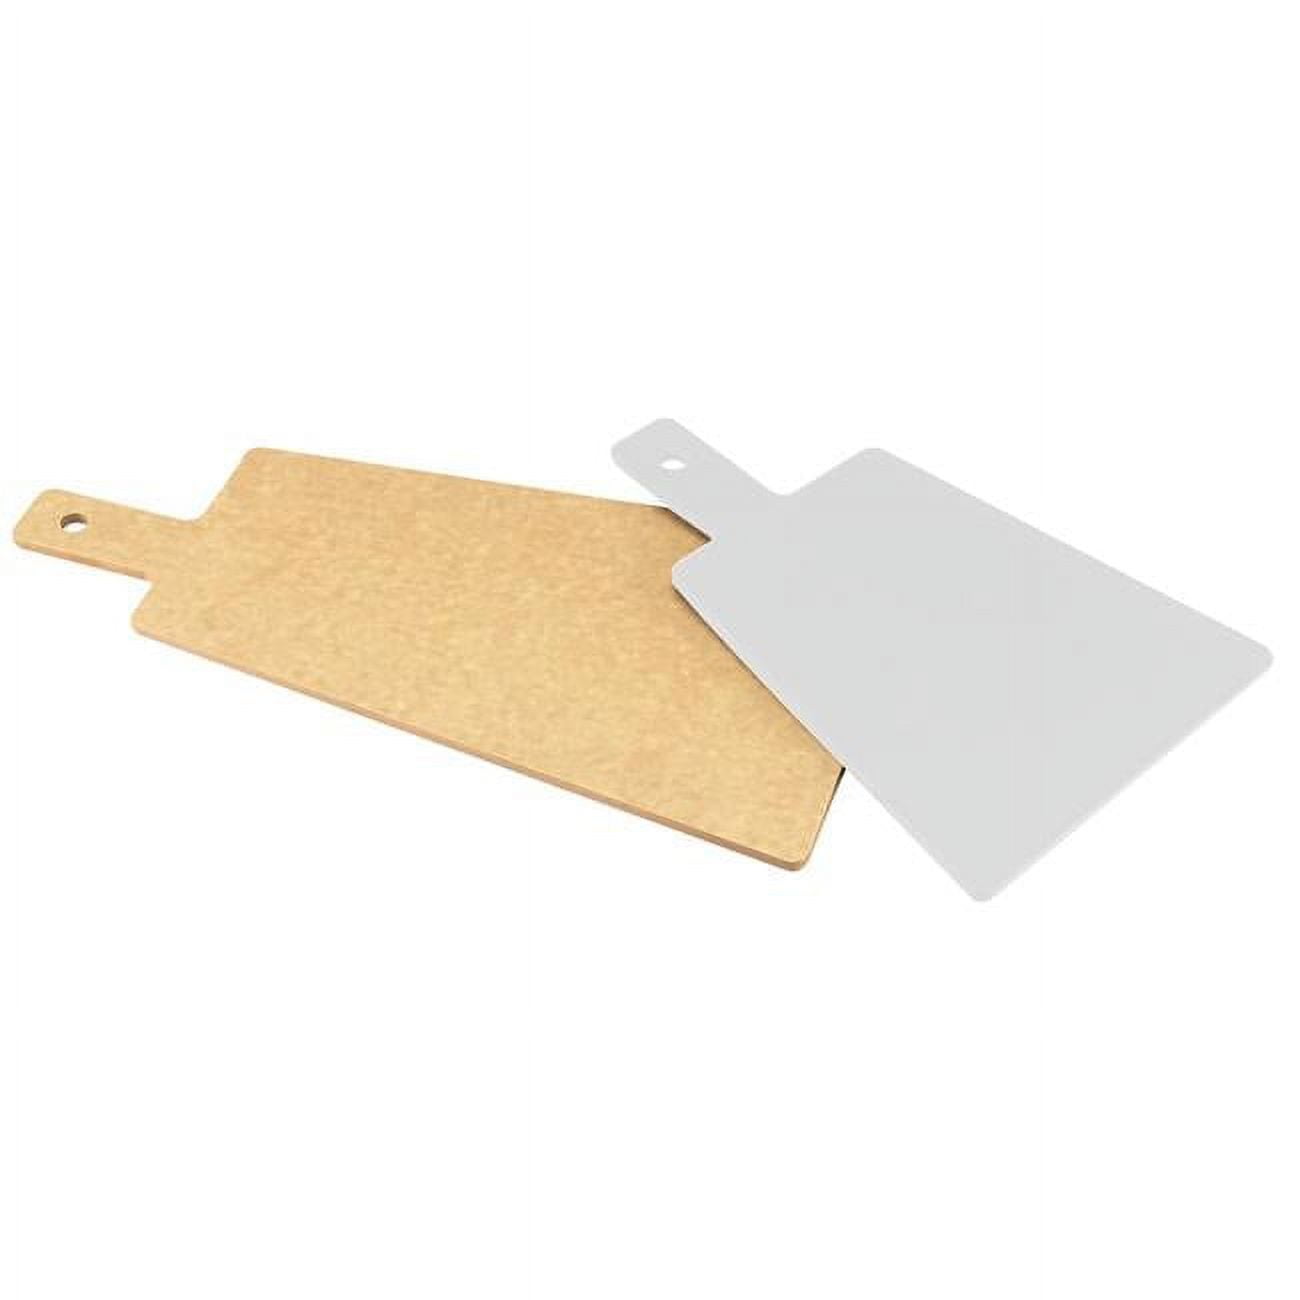 1535-16-14 Natural Trapezoid Flat Bread Serving & Display Board With Handle - 15.625 X 8 X .25 In.